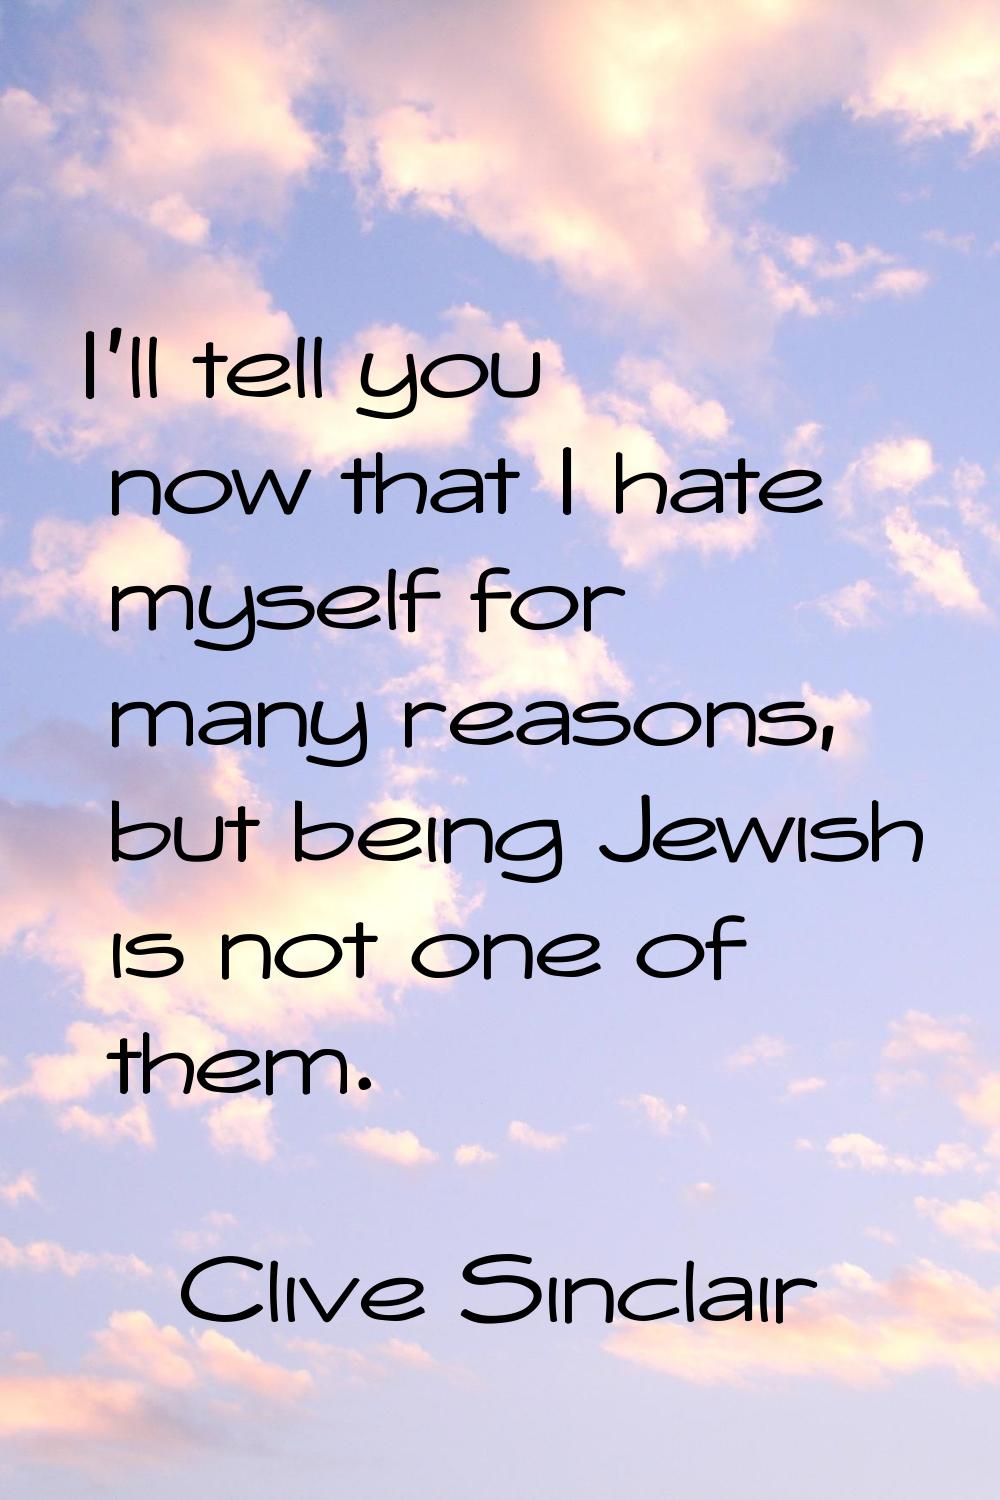 I'll tell you now that I hate myself for many reasons, but being Jewish is not one of them.